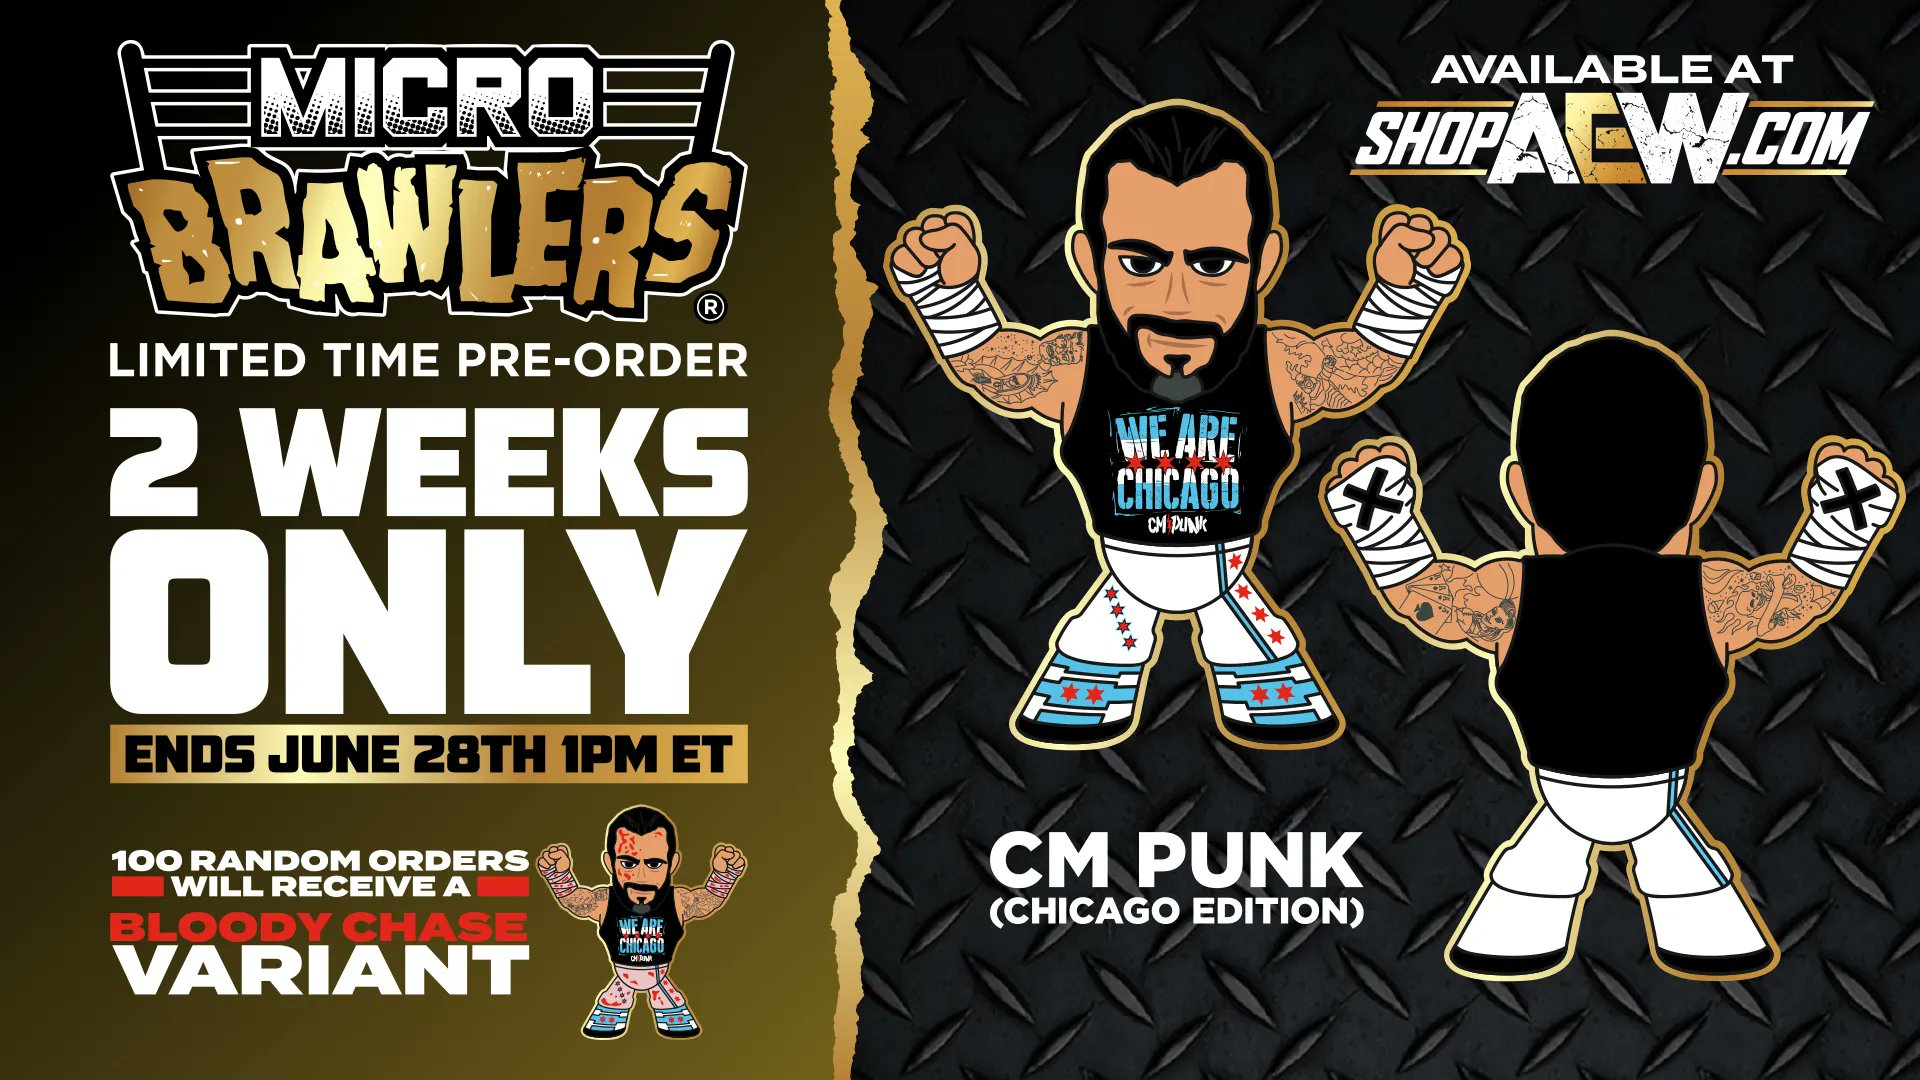 ShopAEW.com on X: LAST CHANCE! The deadline to pre-order your @CMPunk  (Chicago Edition) Micro Brawlers at  is 1pm ET  TODAY! 100 random orders will receive a bloody chase variant! #shopaew #aew  #